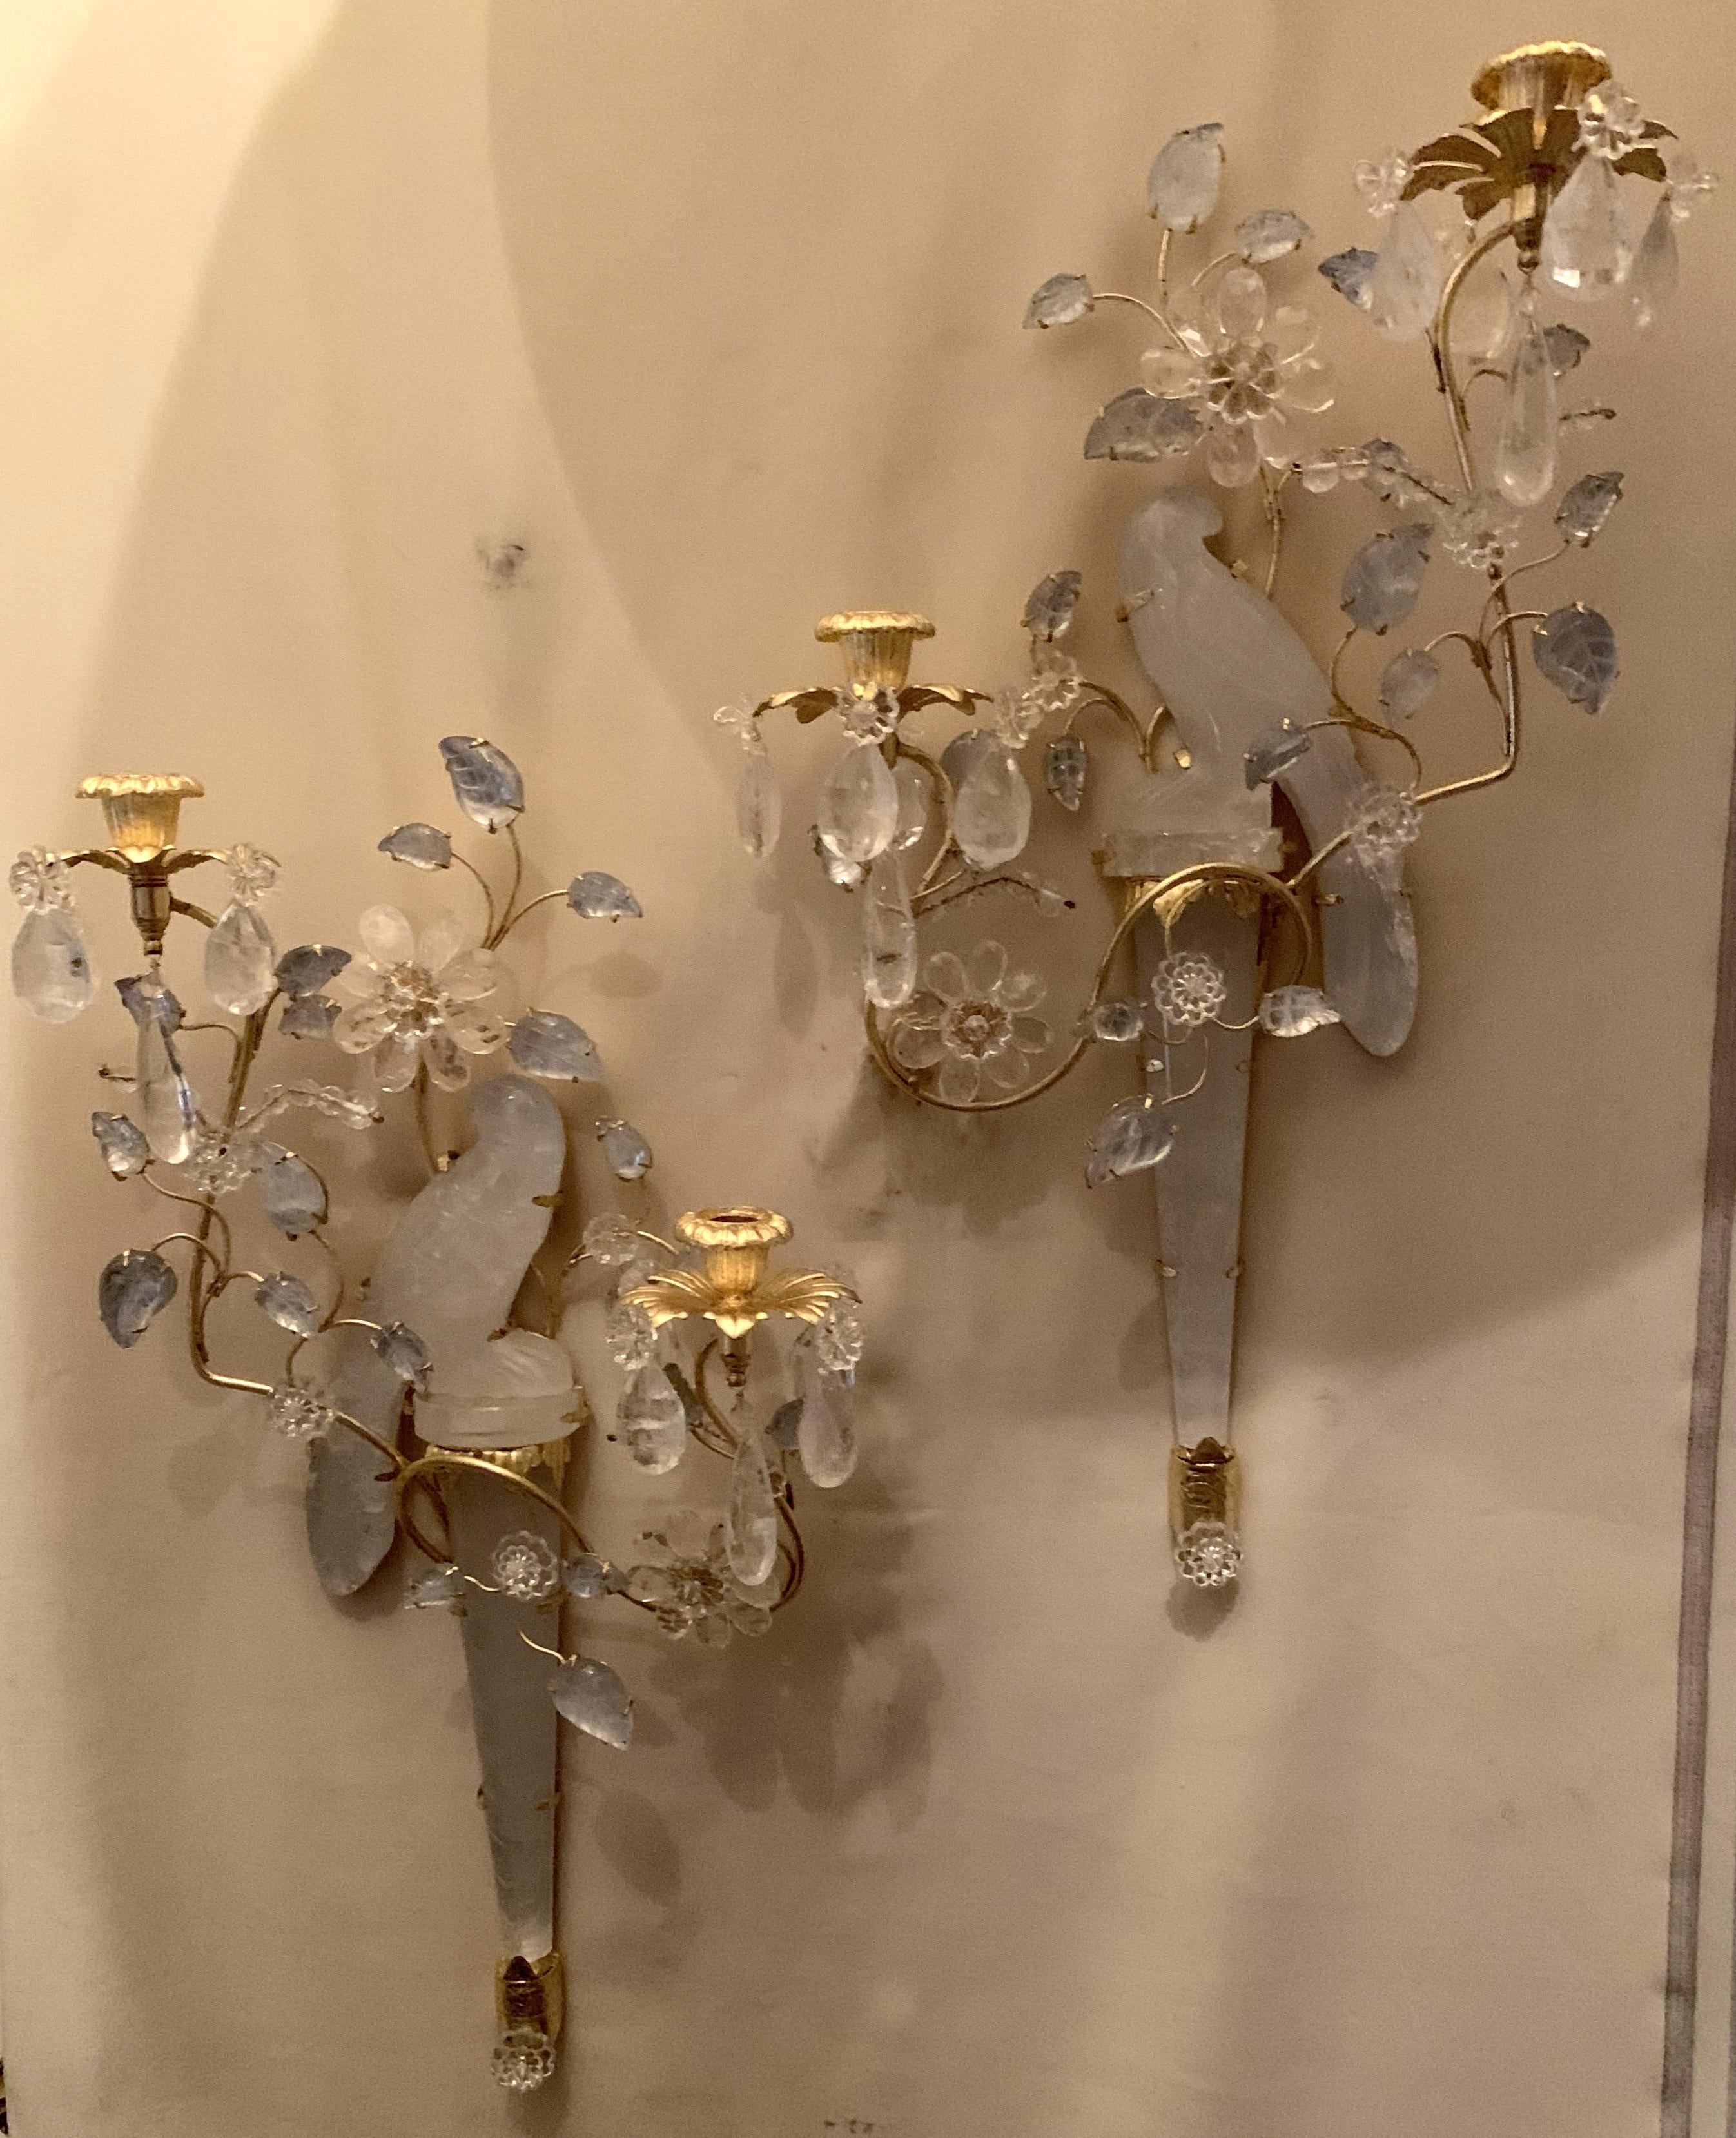 A wonderful pair of chinoiserie style rock crystal two-arm sconces with gold gilt birds facing one another with flowers and leaves throughout, in the manner of Bagues & Sherle Wagner.
Two pairs available
Currently not electrified
$250 to have